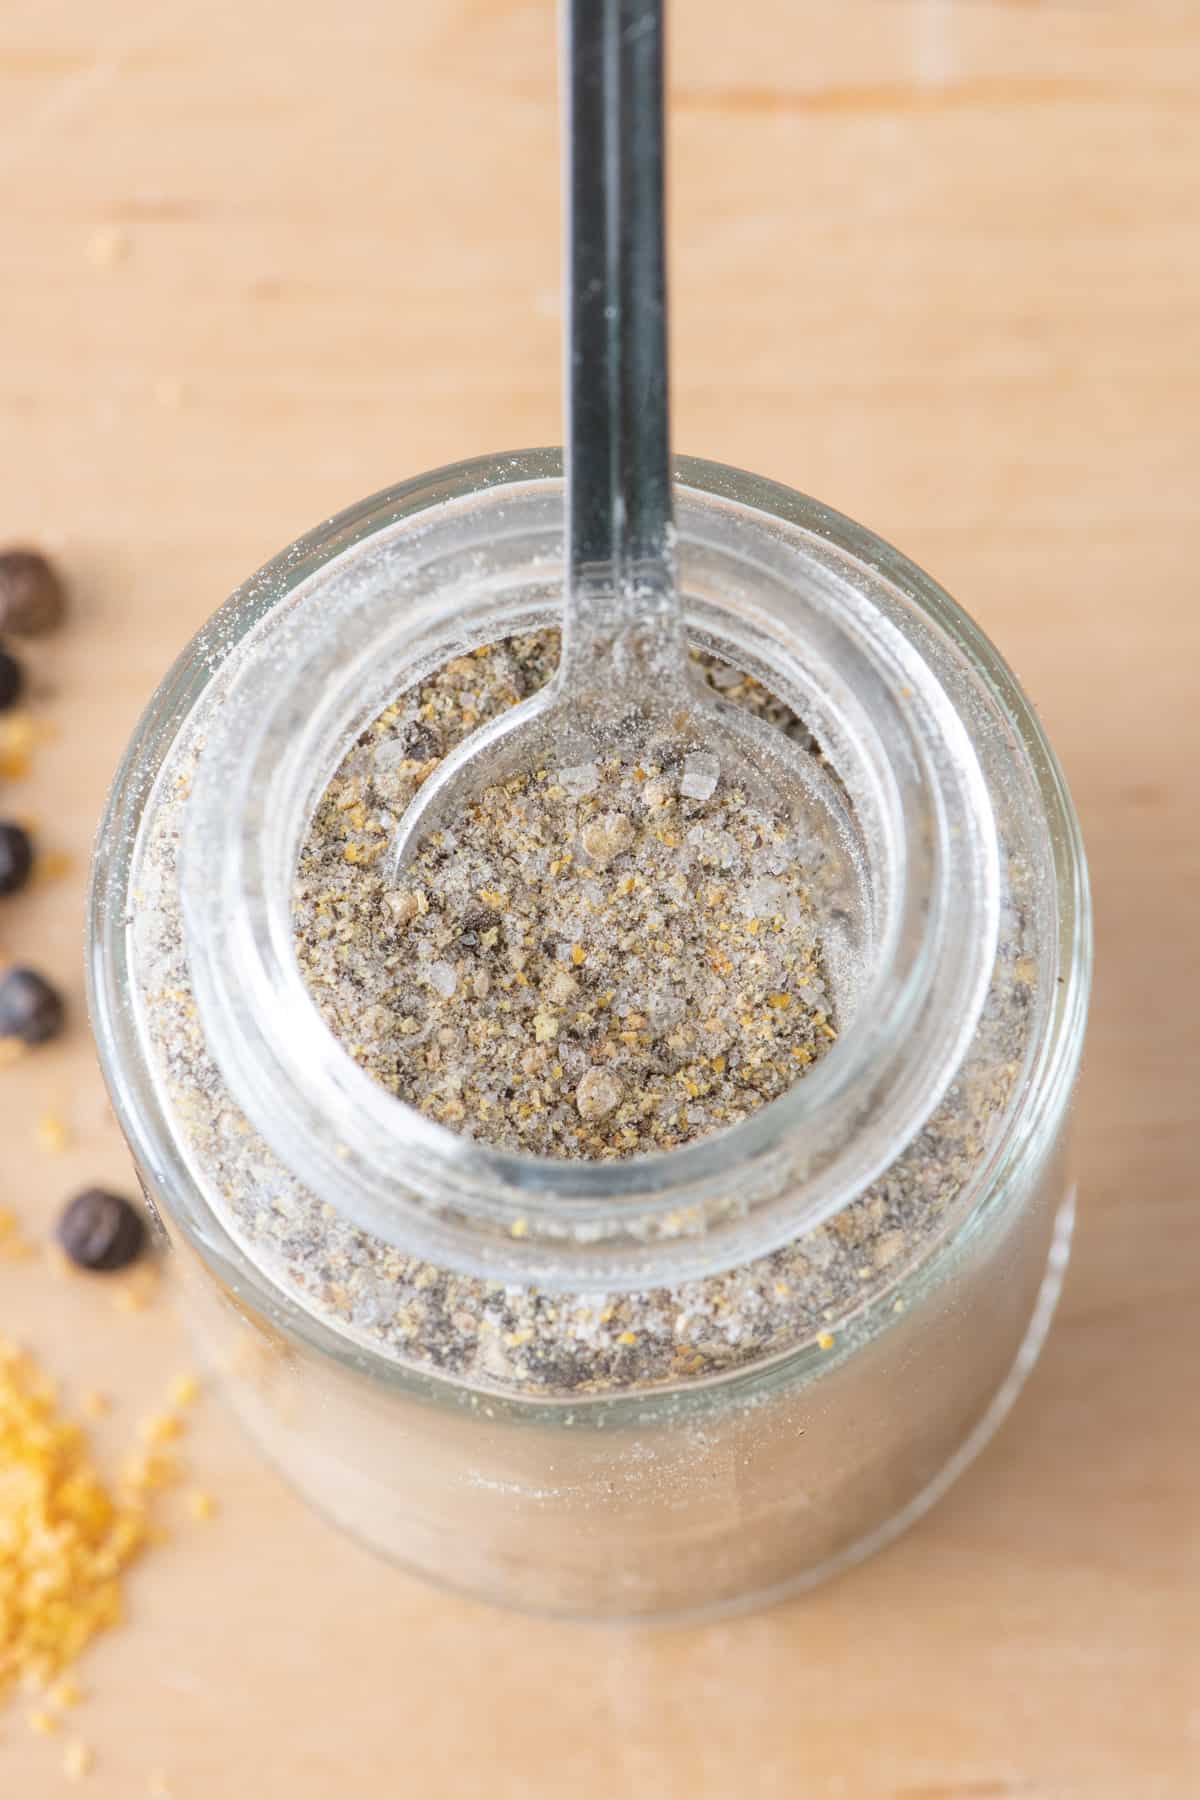 Spice jar filled with lemon pepper seasoning with small baby spoon inside jar to show slightly coarse texture.